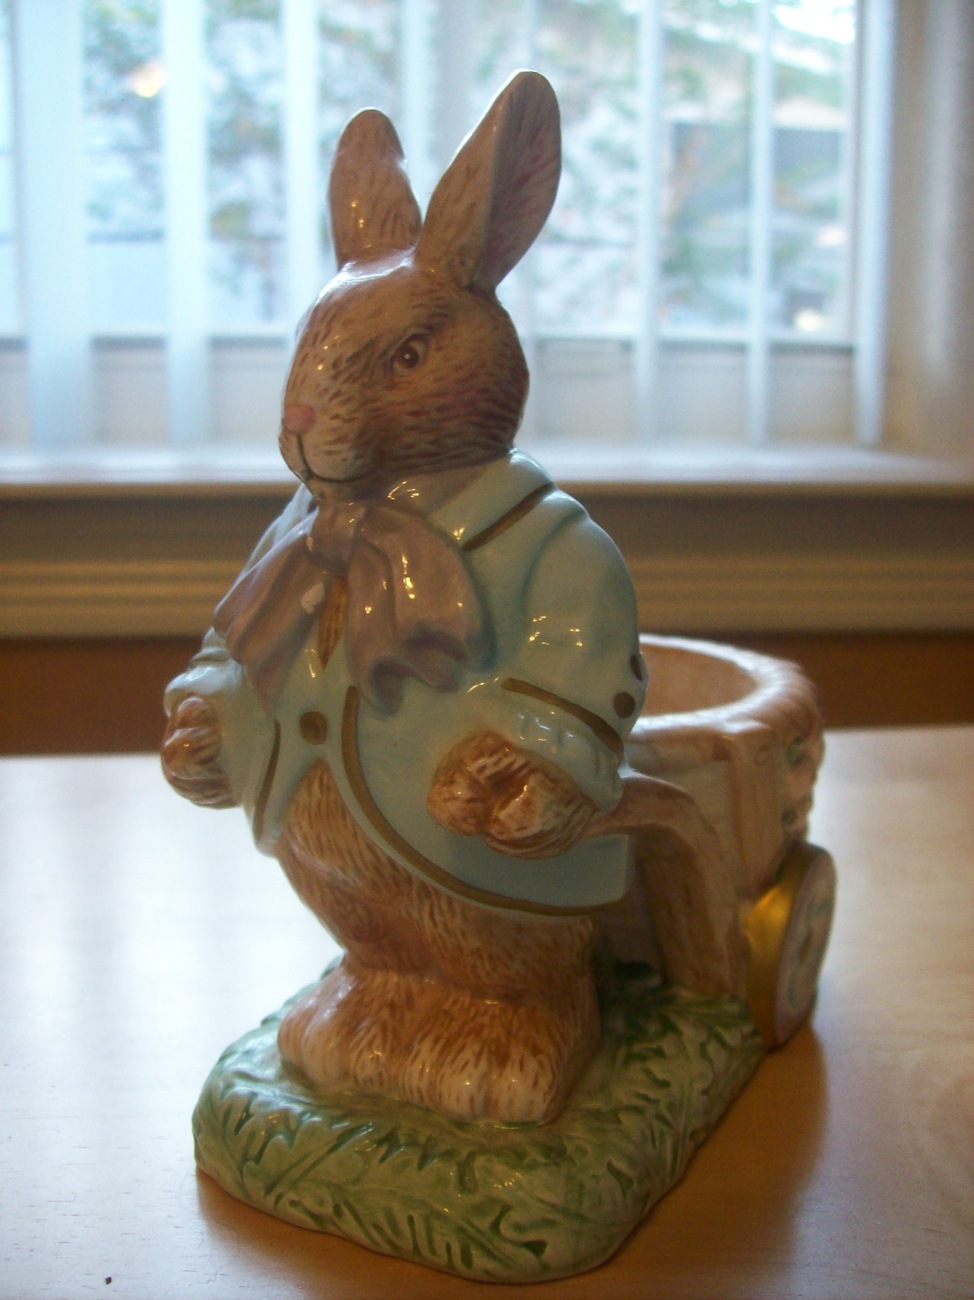 Primary image for Avon Springtime Collections Porcelain Rabbit Figurine